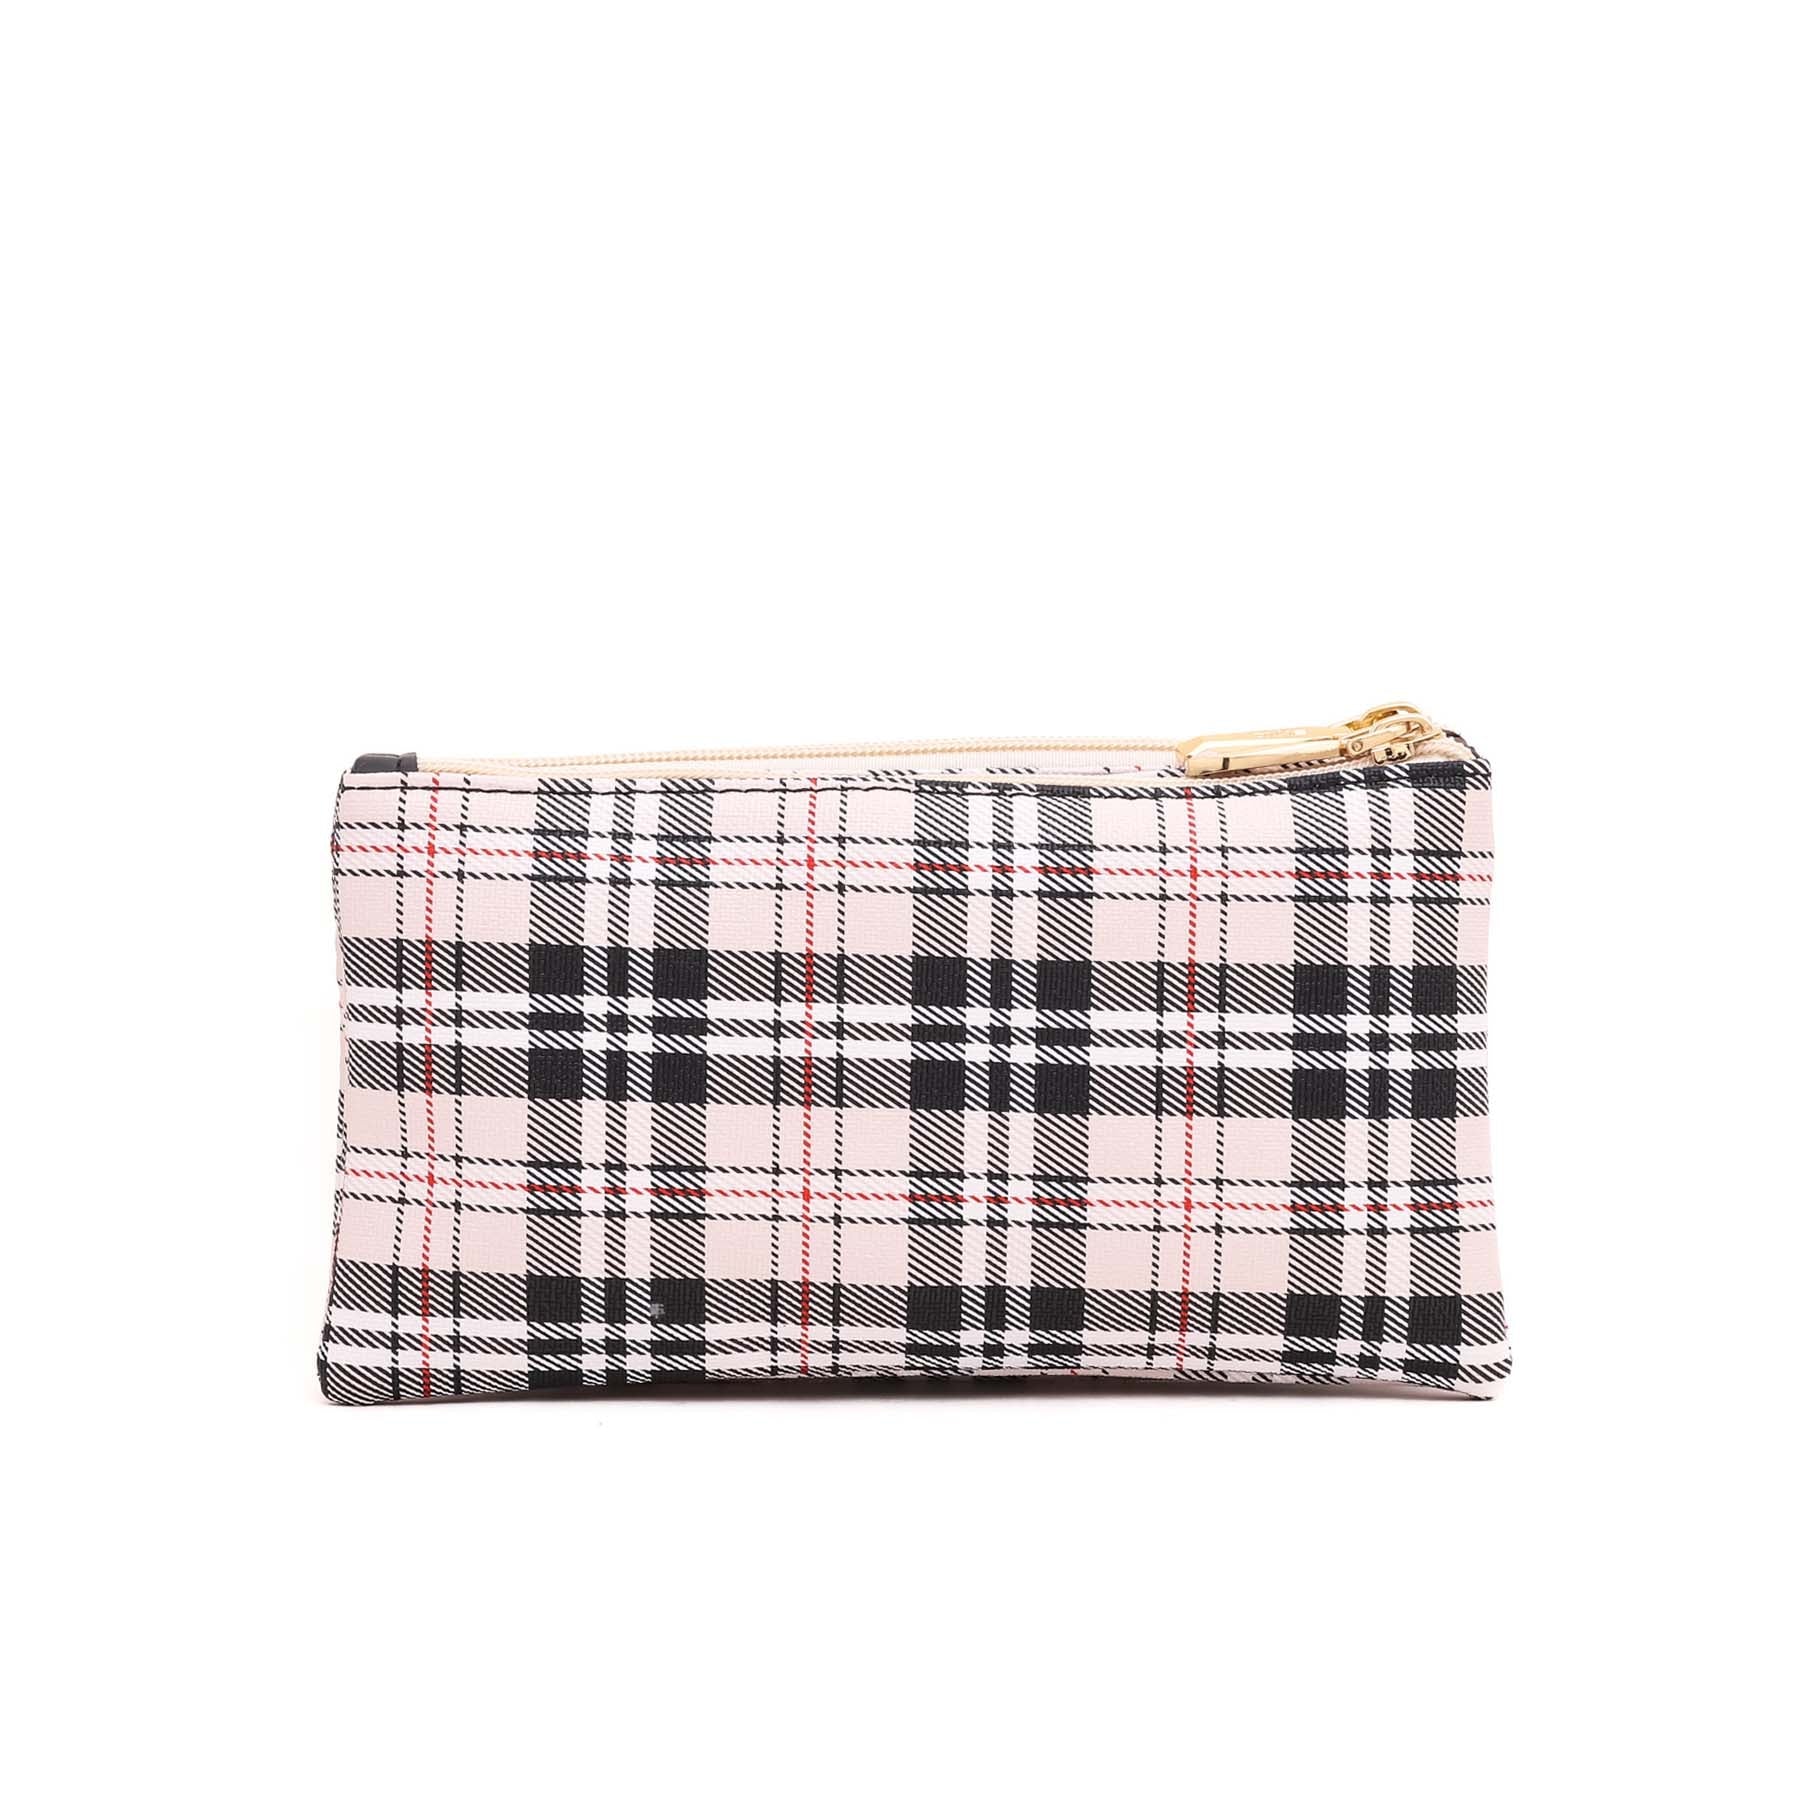 Blkwht Casual Pouch P70905